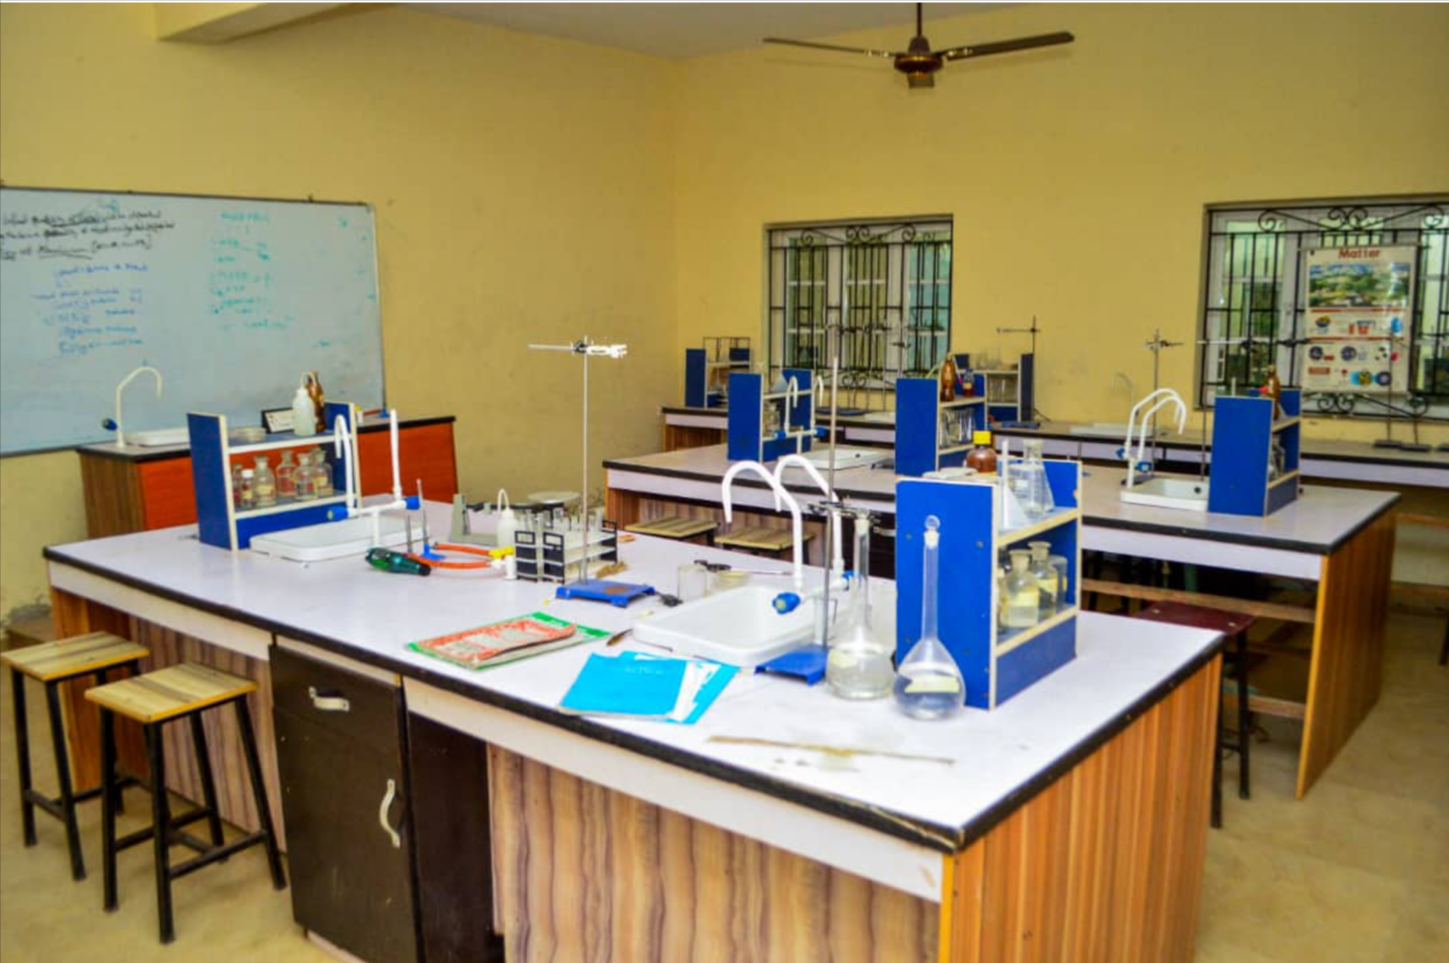 One of the science laboratories 